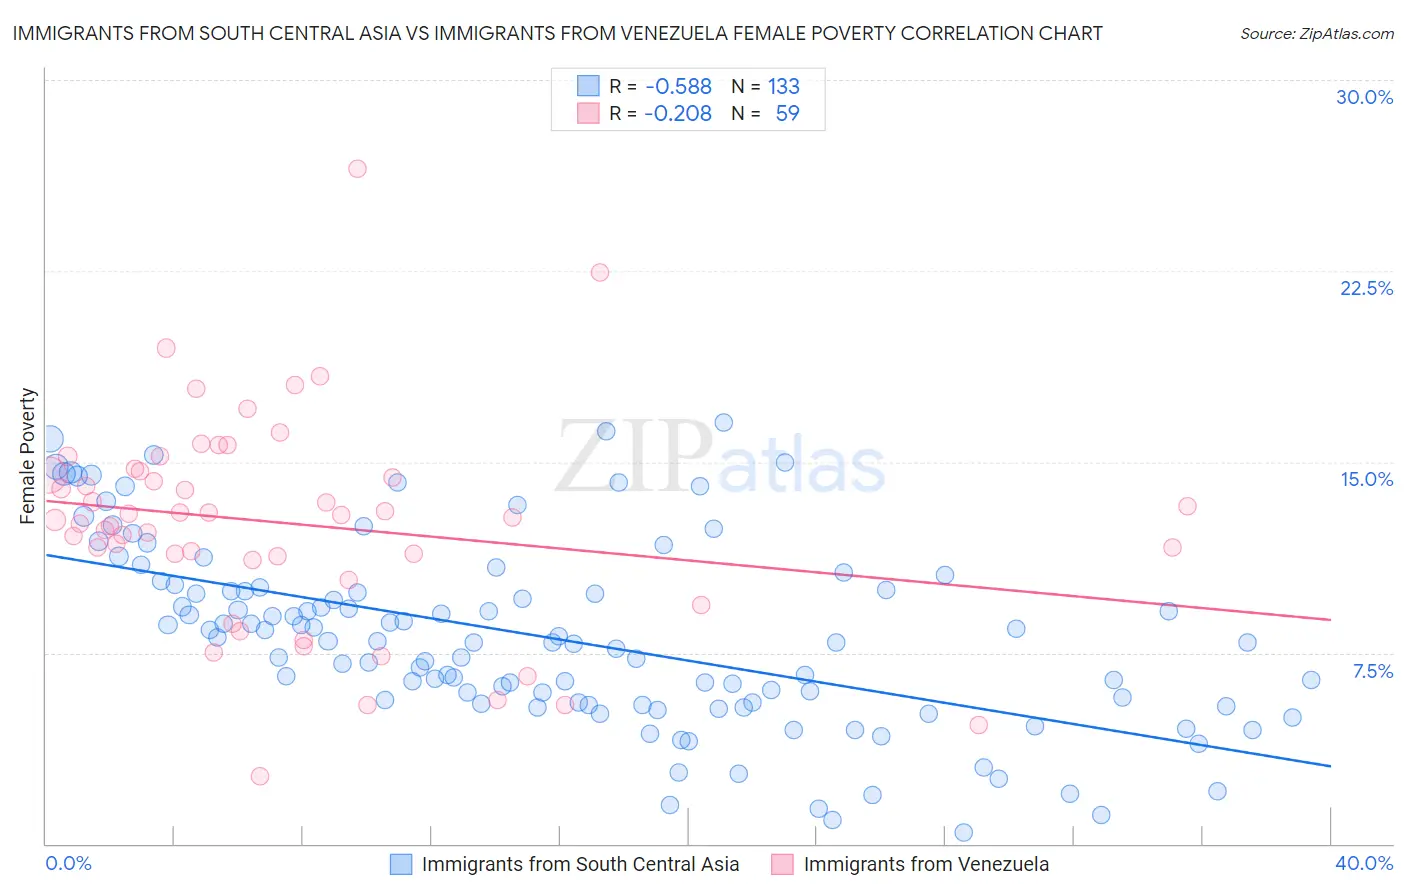 Immigrants from South Central Asia vs Immigrants from Venezuela Female Poverty